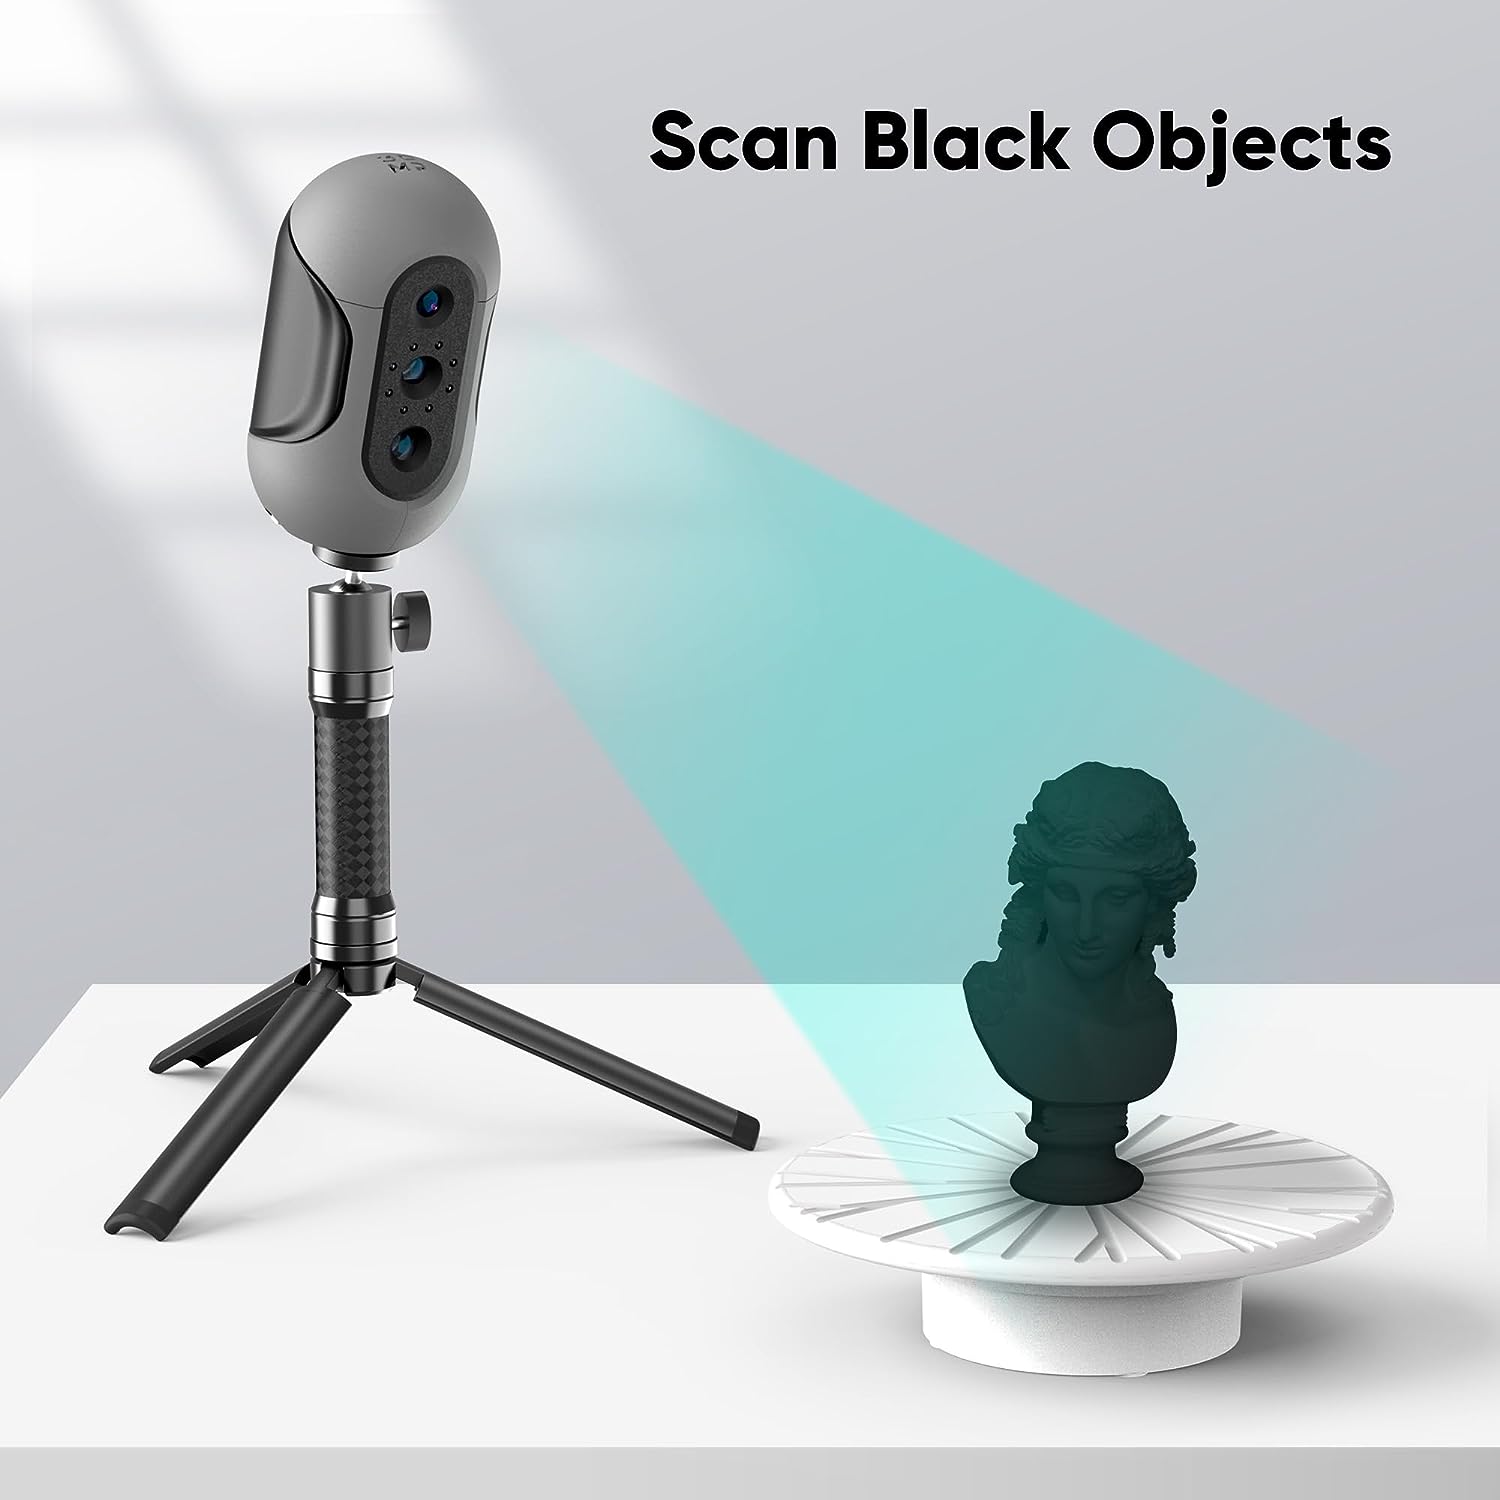 Mole 3D Scanner 0.05mm Accuracy & 0.1mm Resolution with Multi-Spectral Technology